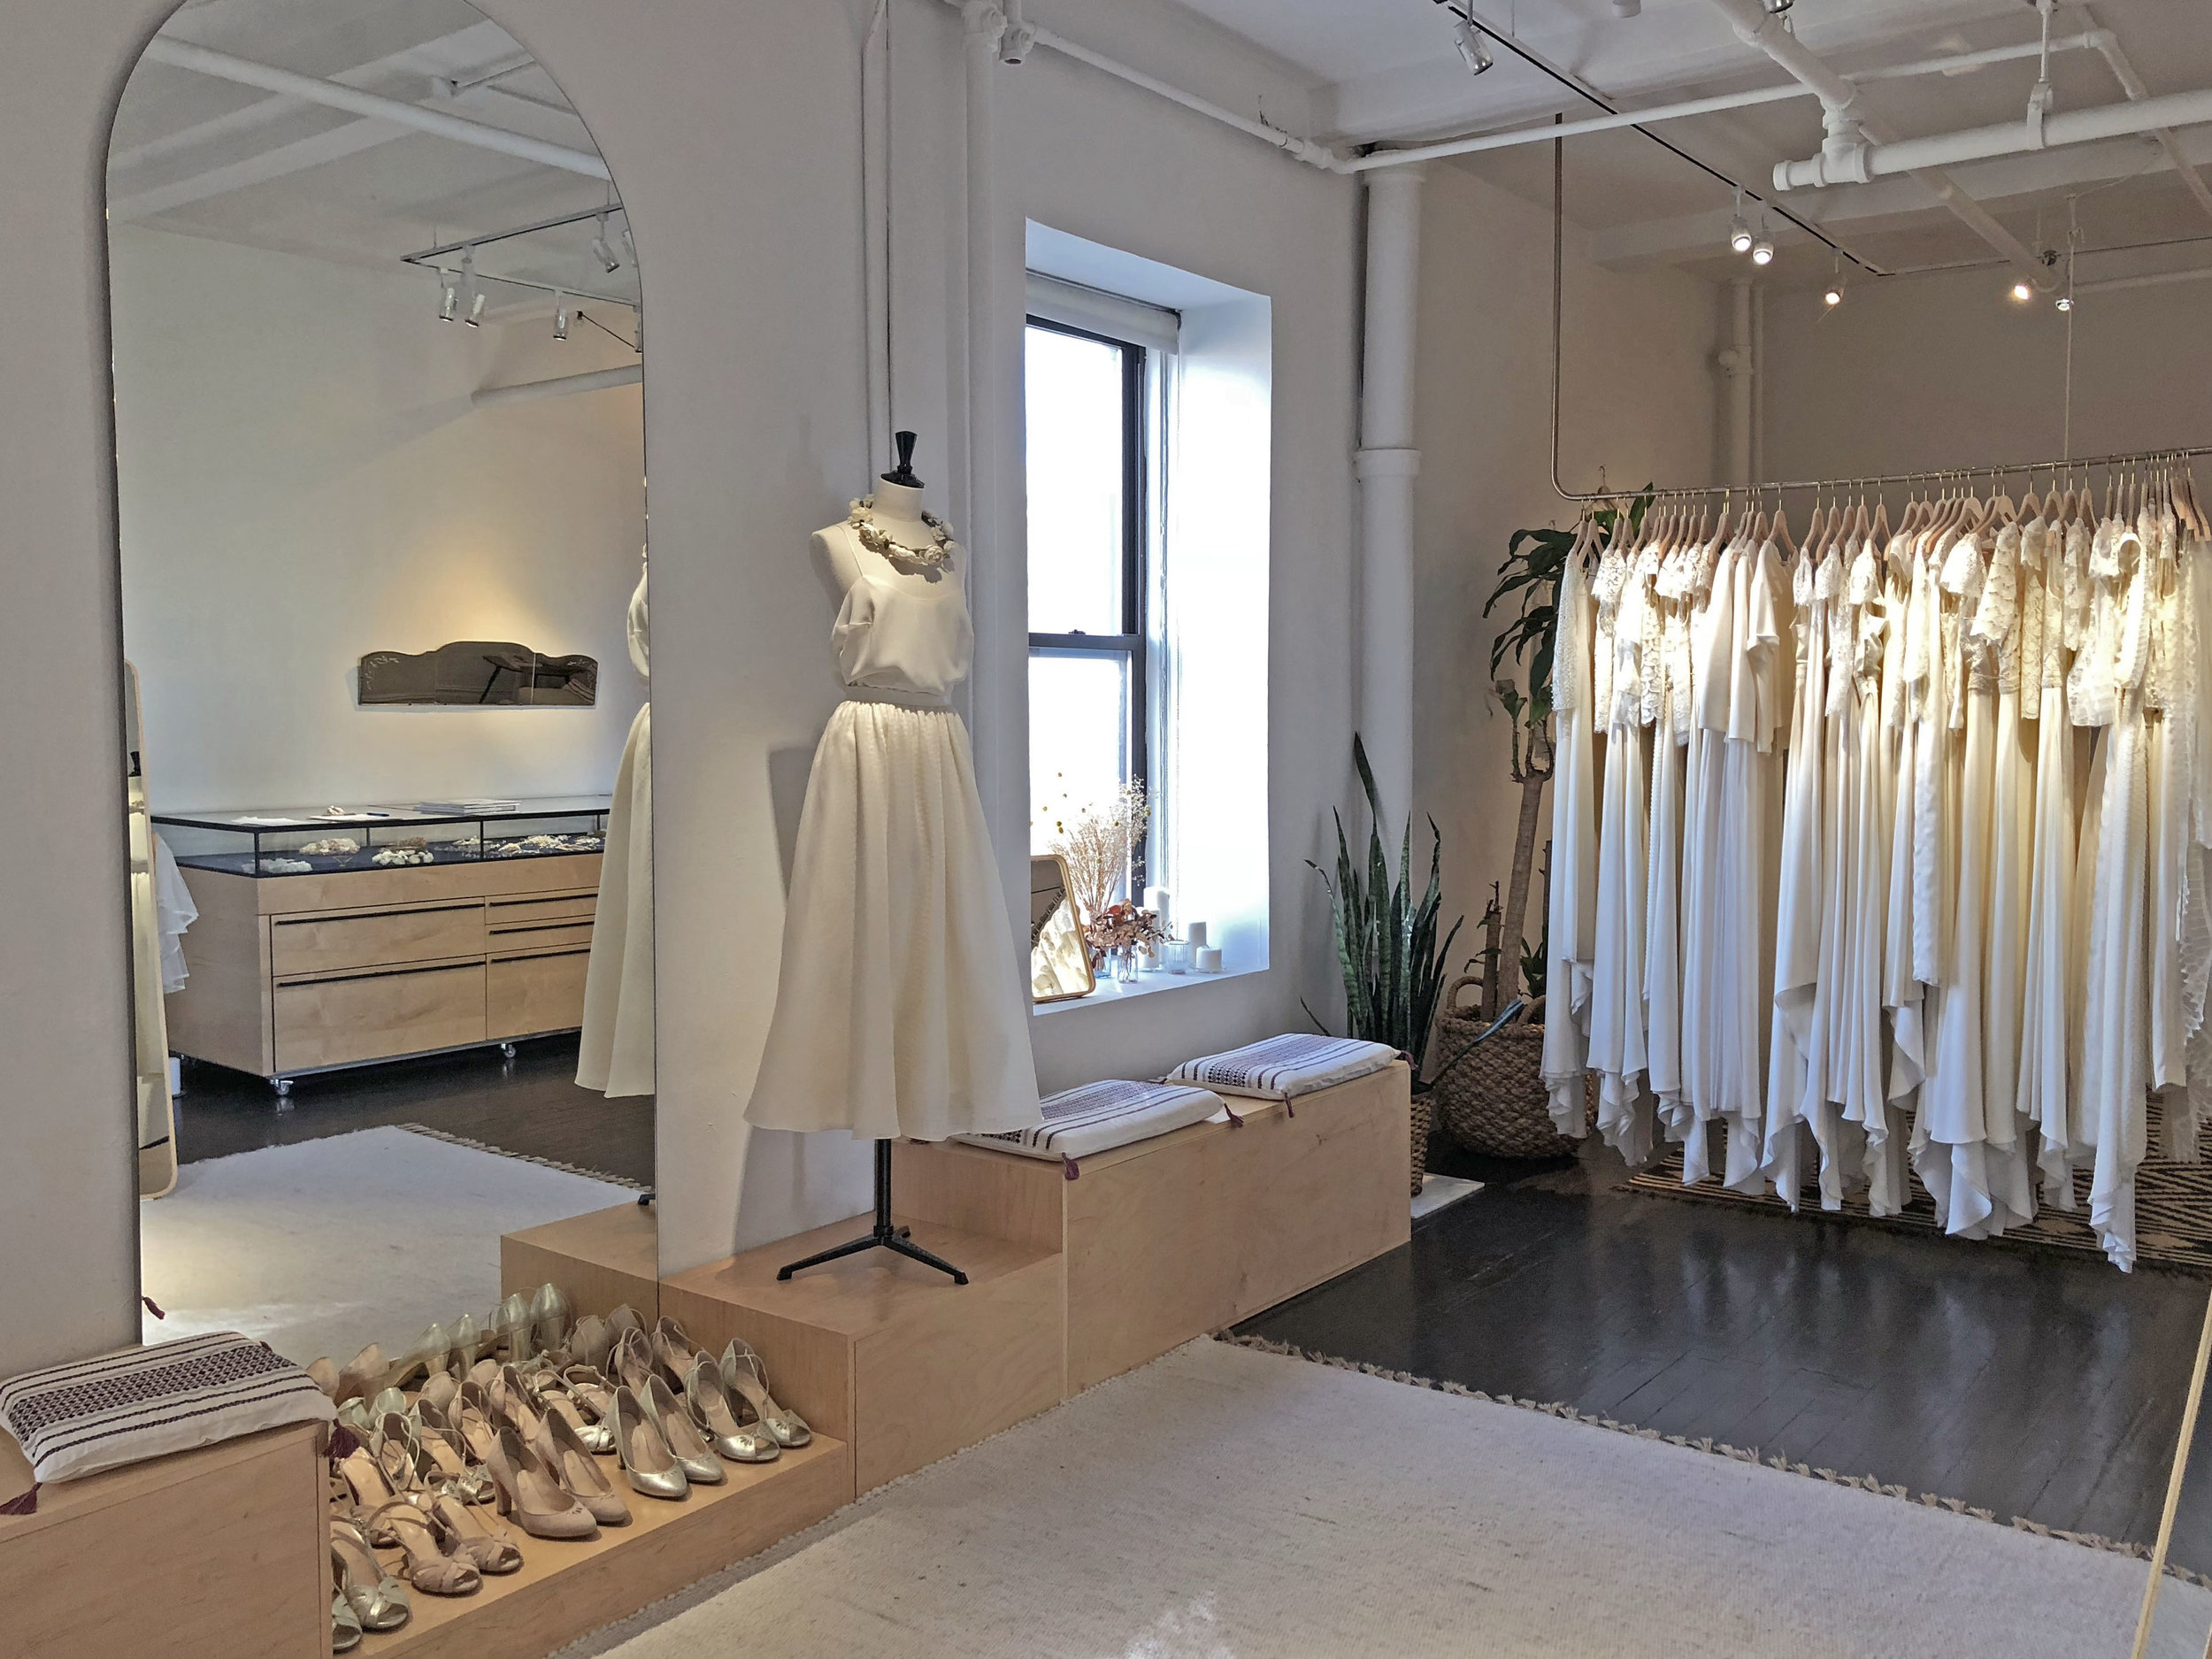 The Bridal welcomes French designer Laure de Sagazan to our Miami boutique